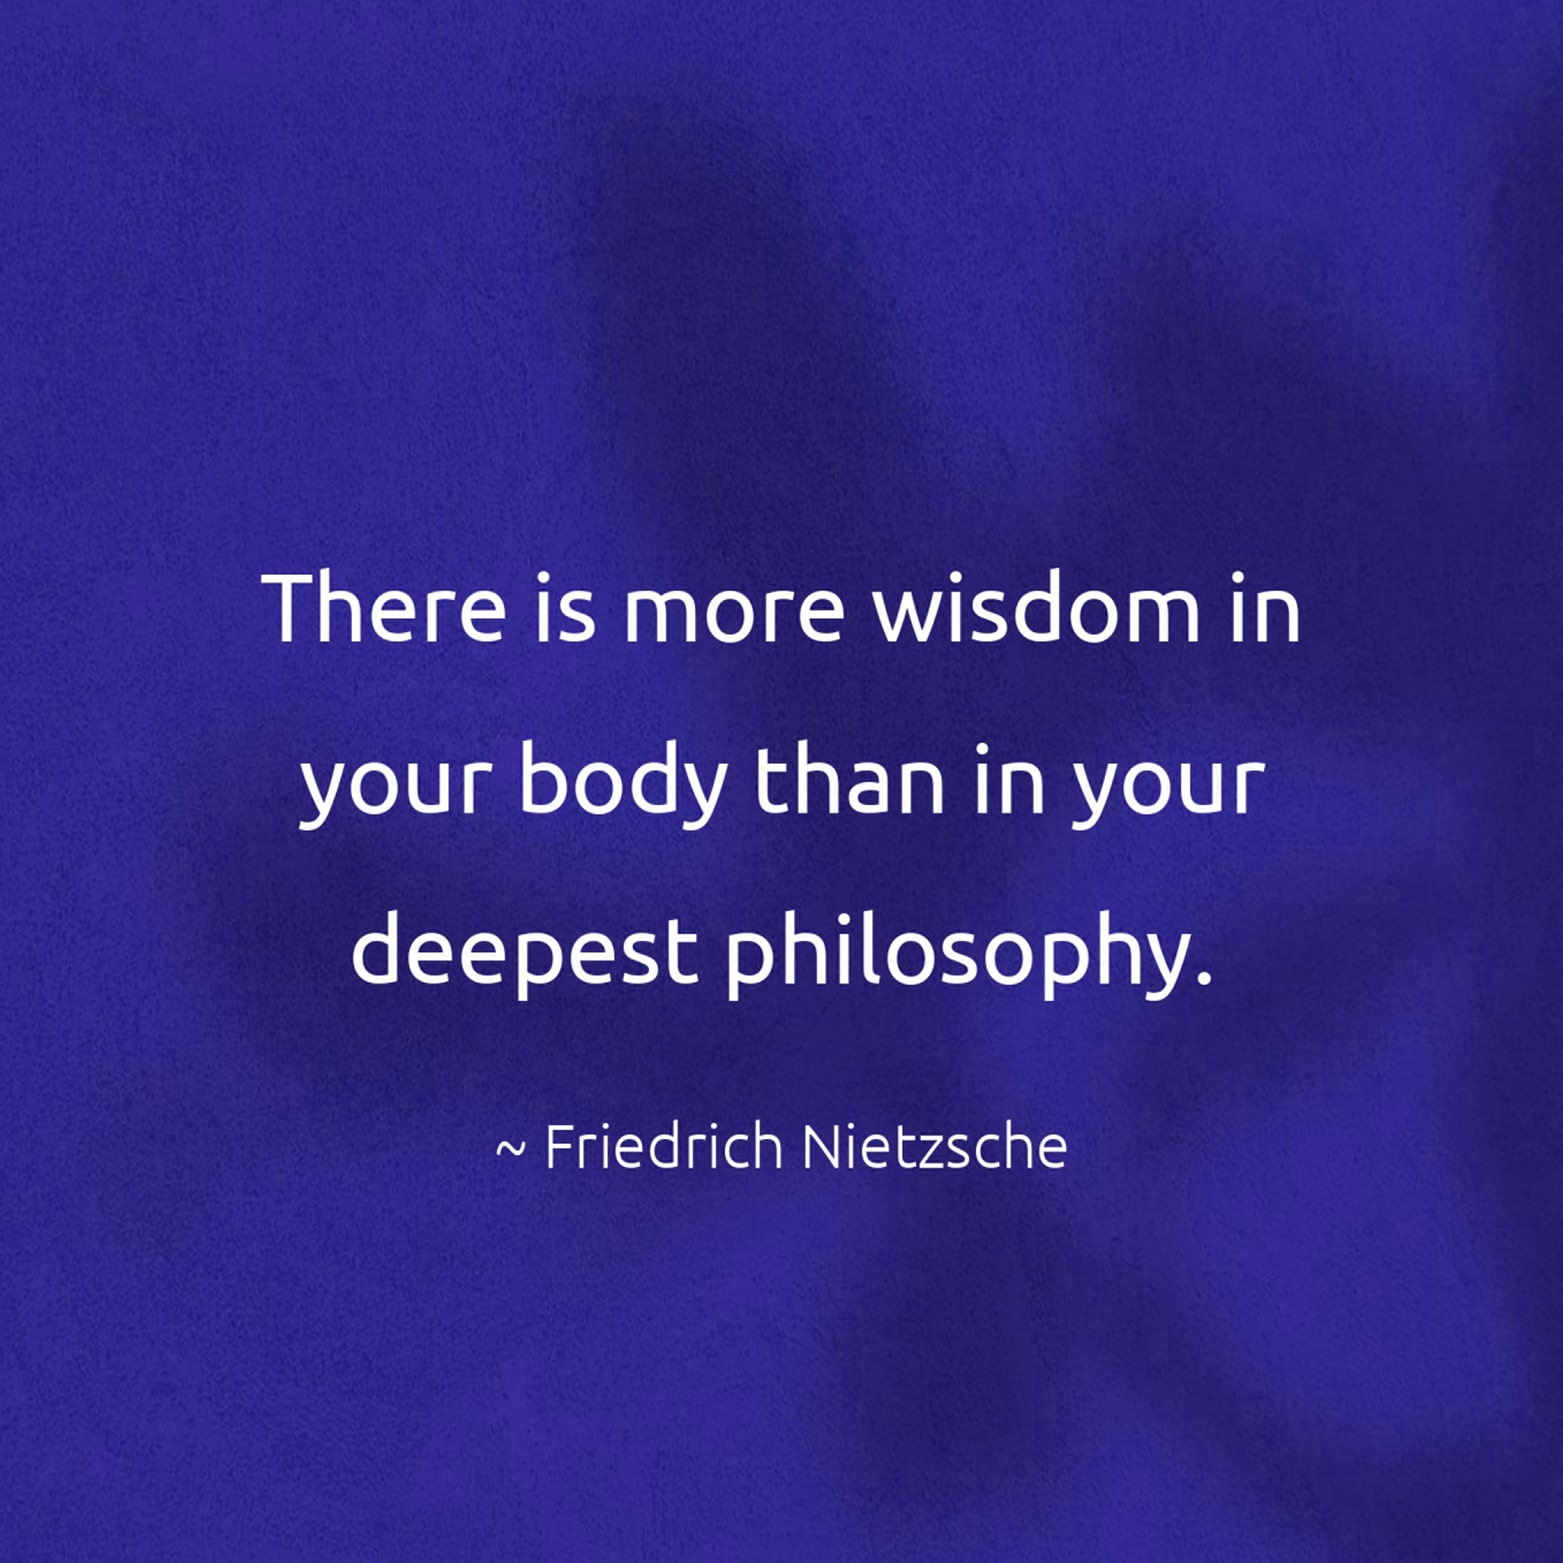 There is more wisdom in your body than in your deepest philosophy. - Friedrich Nietzsche